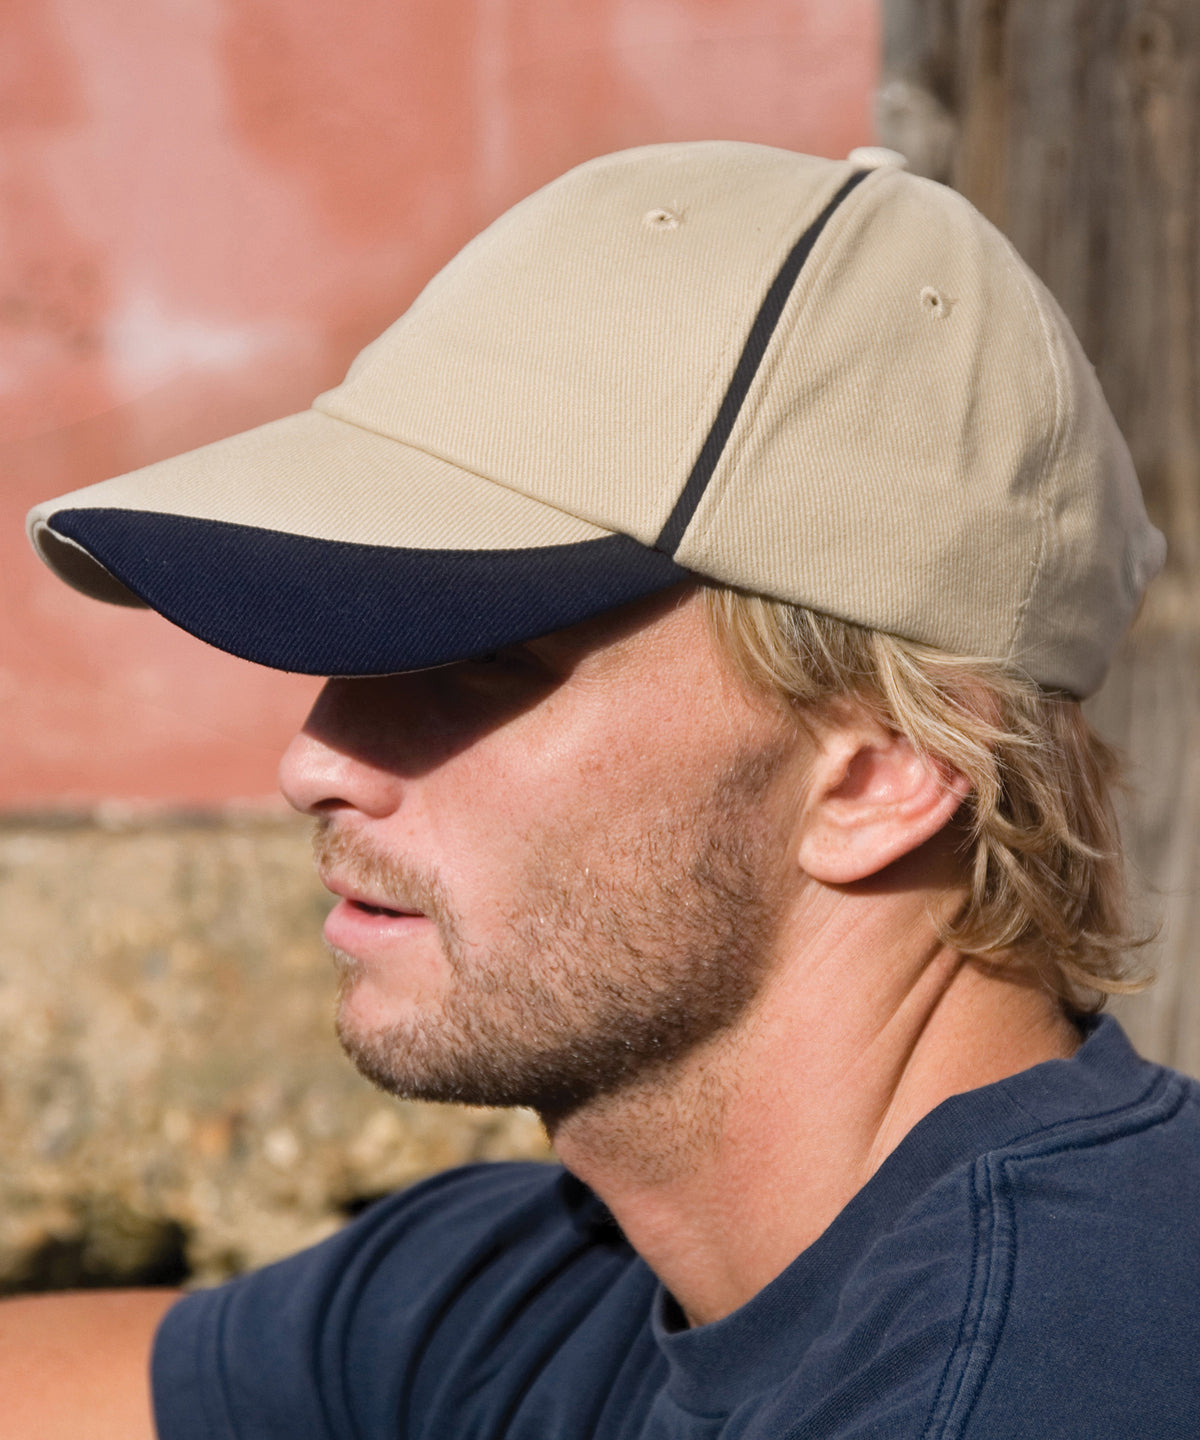 Húfur - Heavy Brushed Cotton Cap With Scallop Peak And Contrast Trim